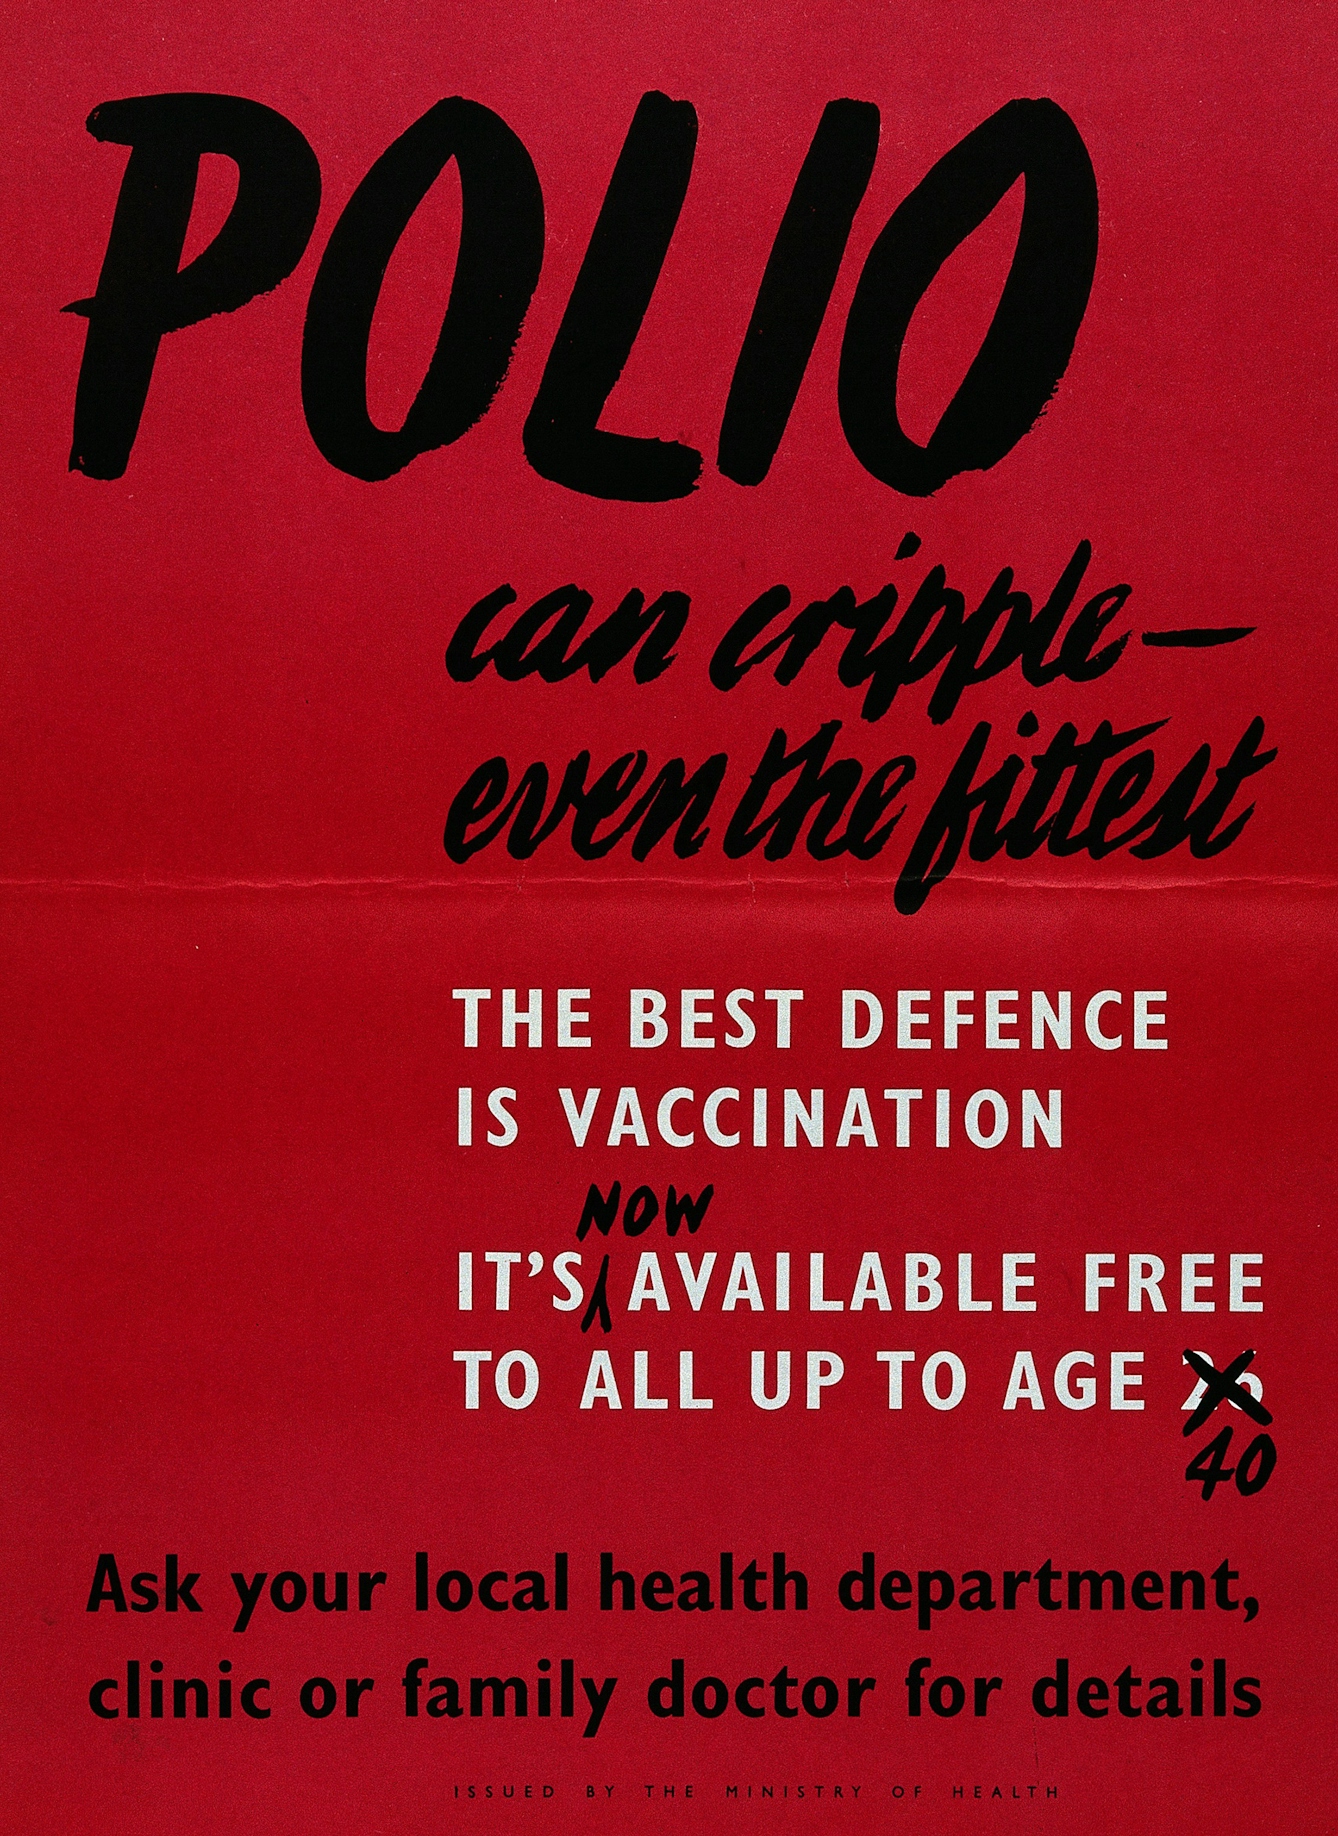 British Ministry of Health poster stating “the best defence” against polio “is vaccination”, around 1940